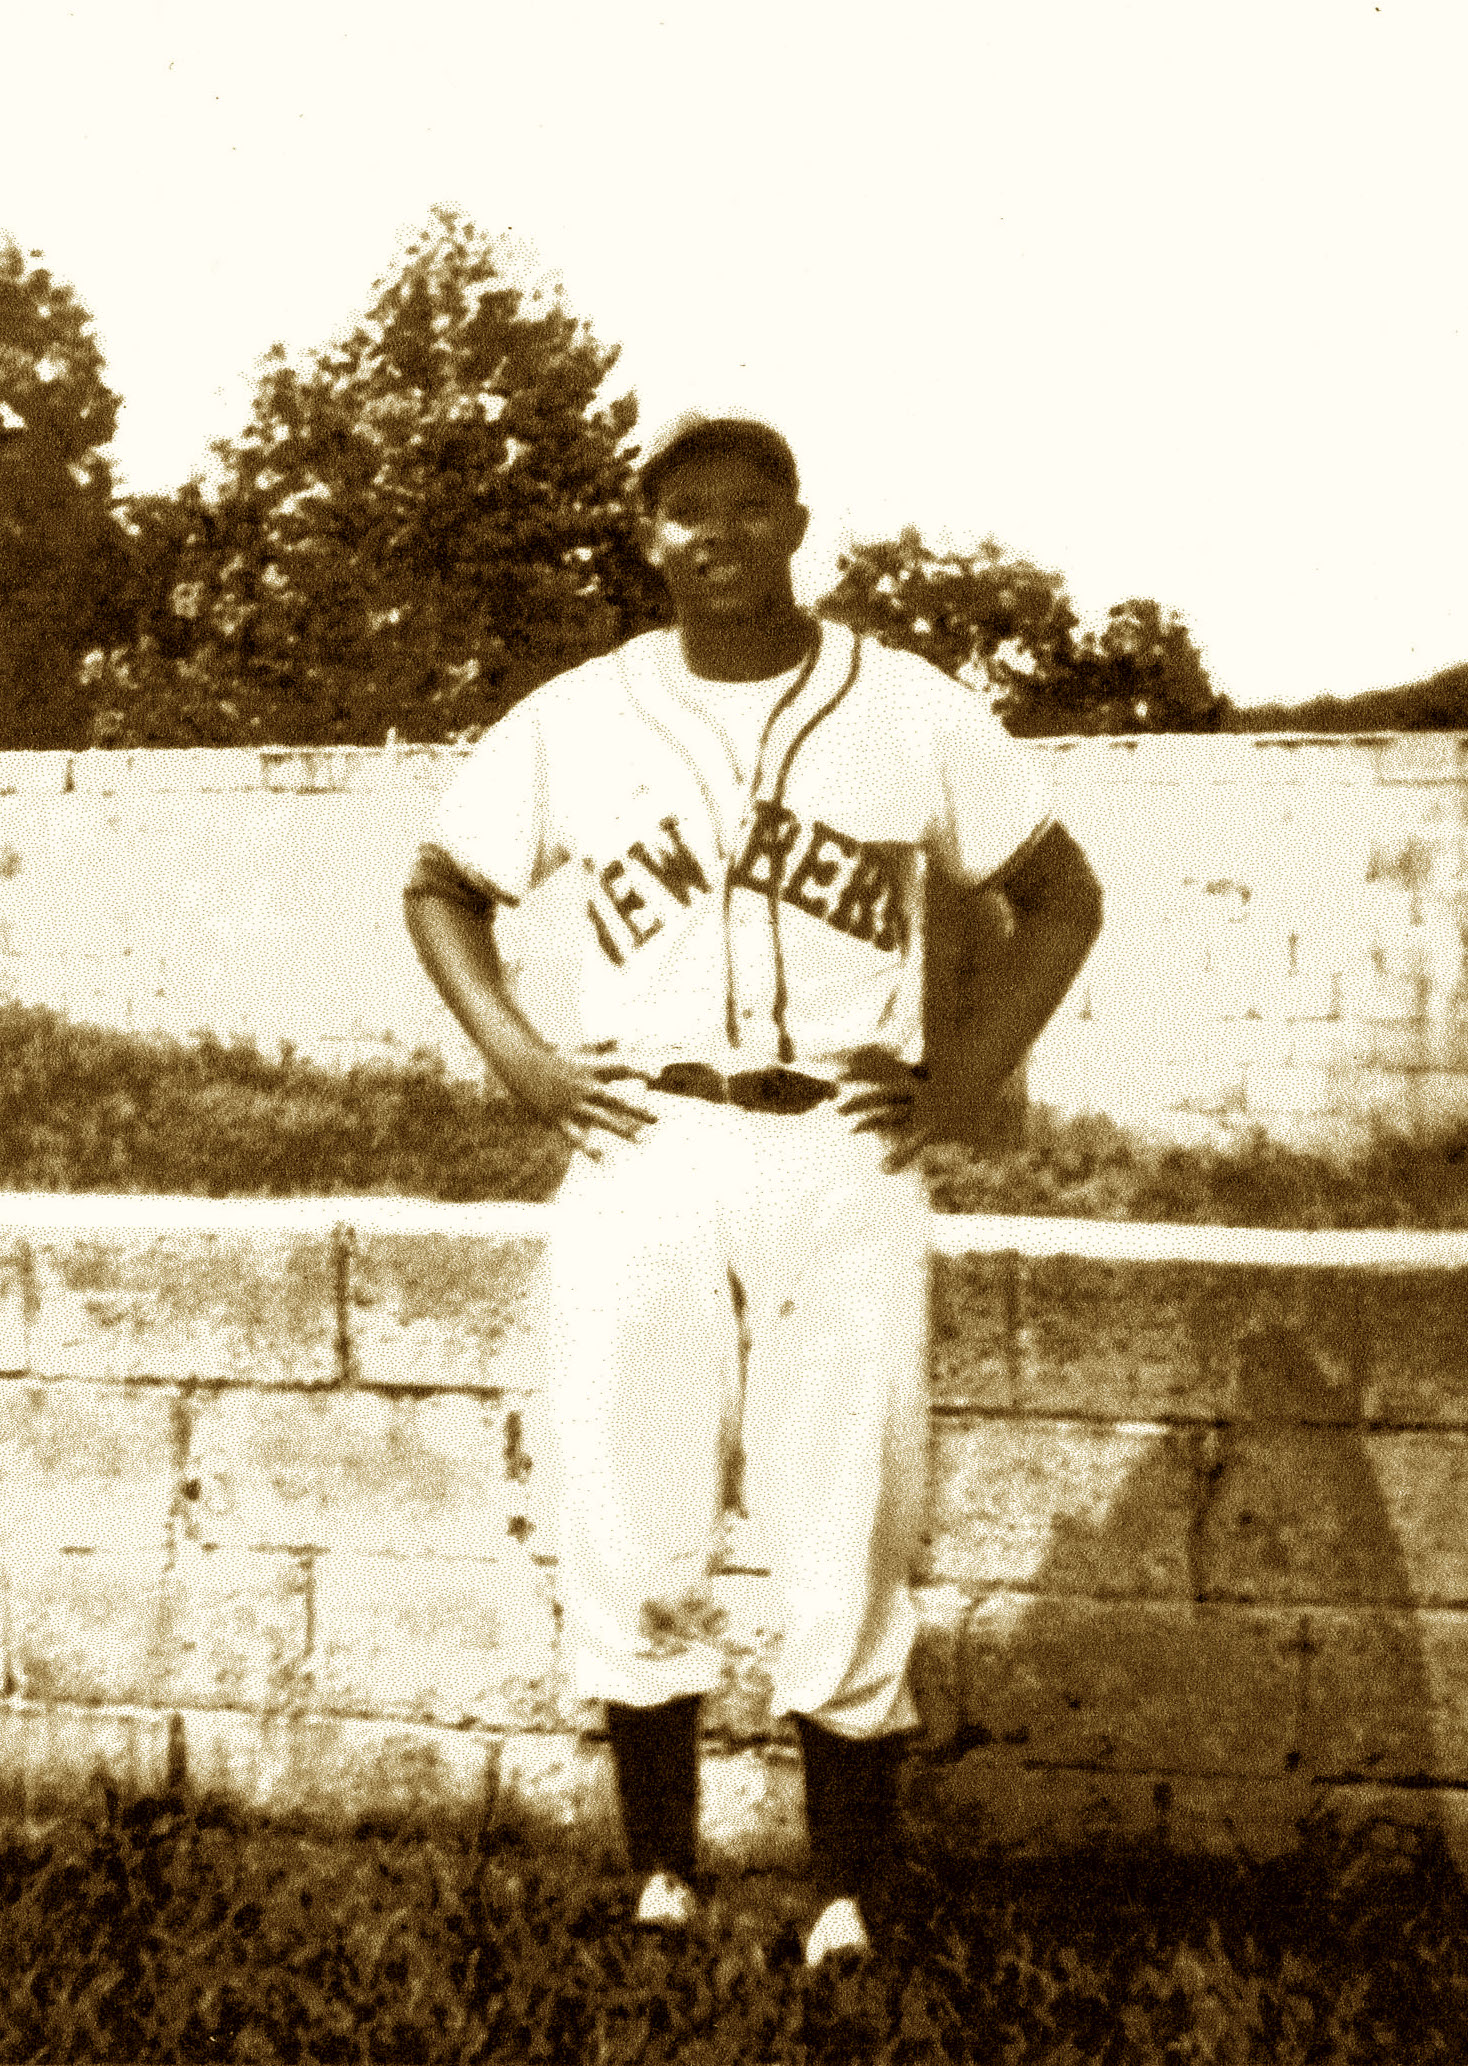 image: Stanley White in uniform. Stanley White, the beloved namesake for a community center that Hurricane Florence flooded, was a New Bern hero who made a marked impact on the African American community. He died tragically during a baseball game in 1971.